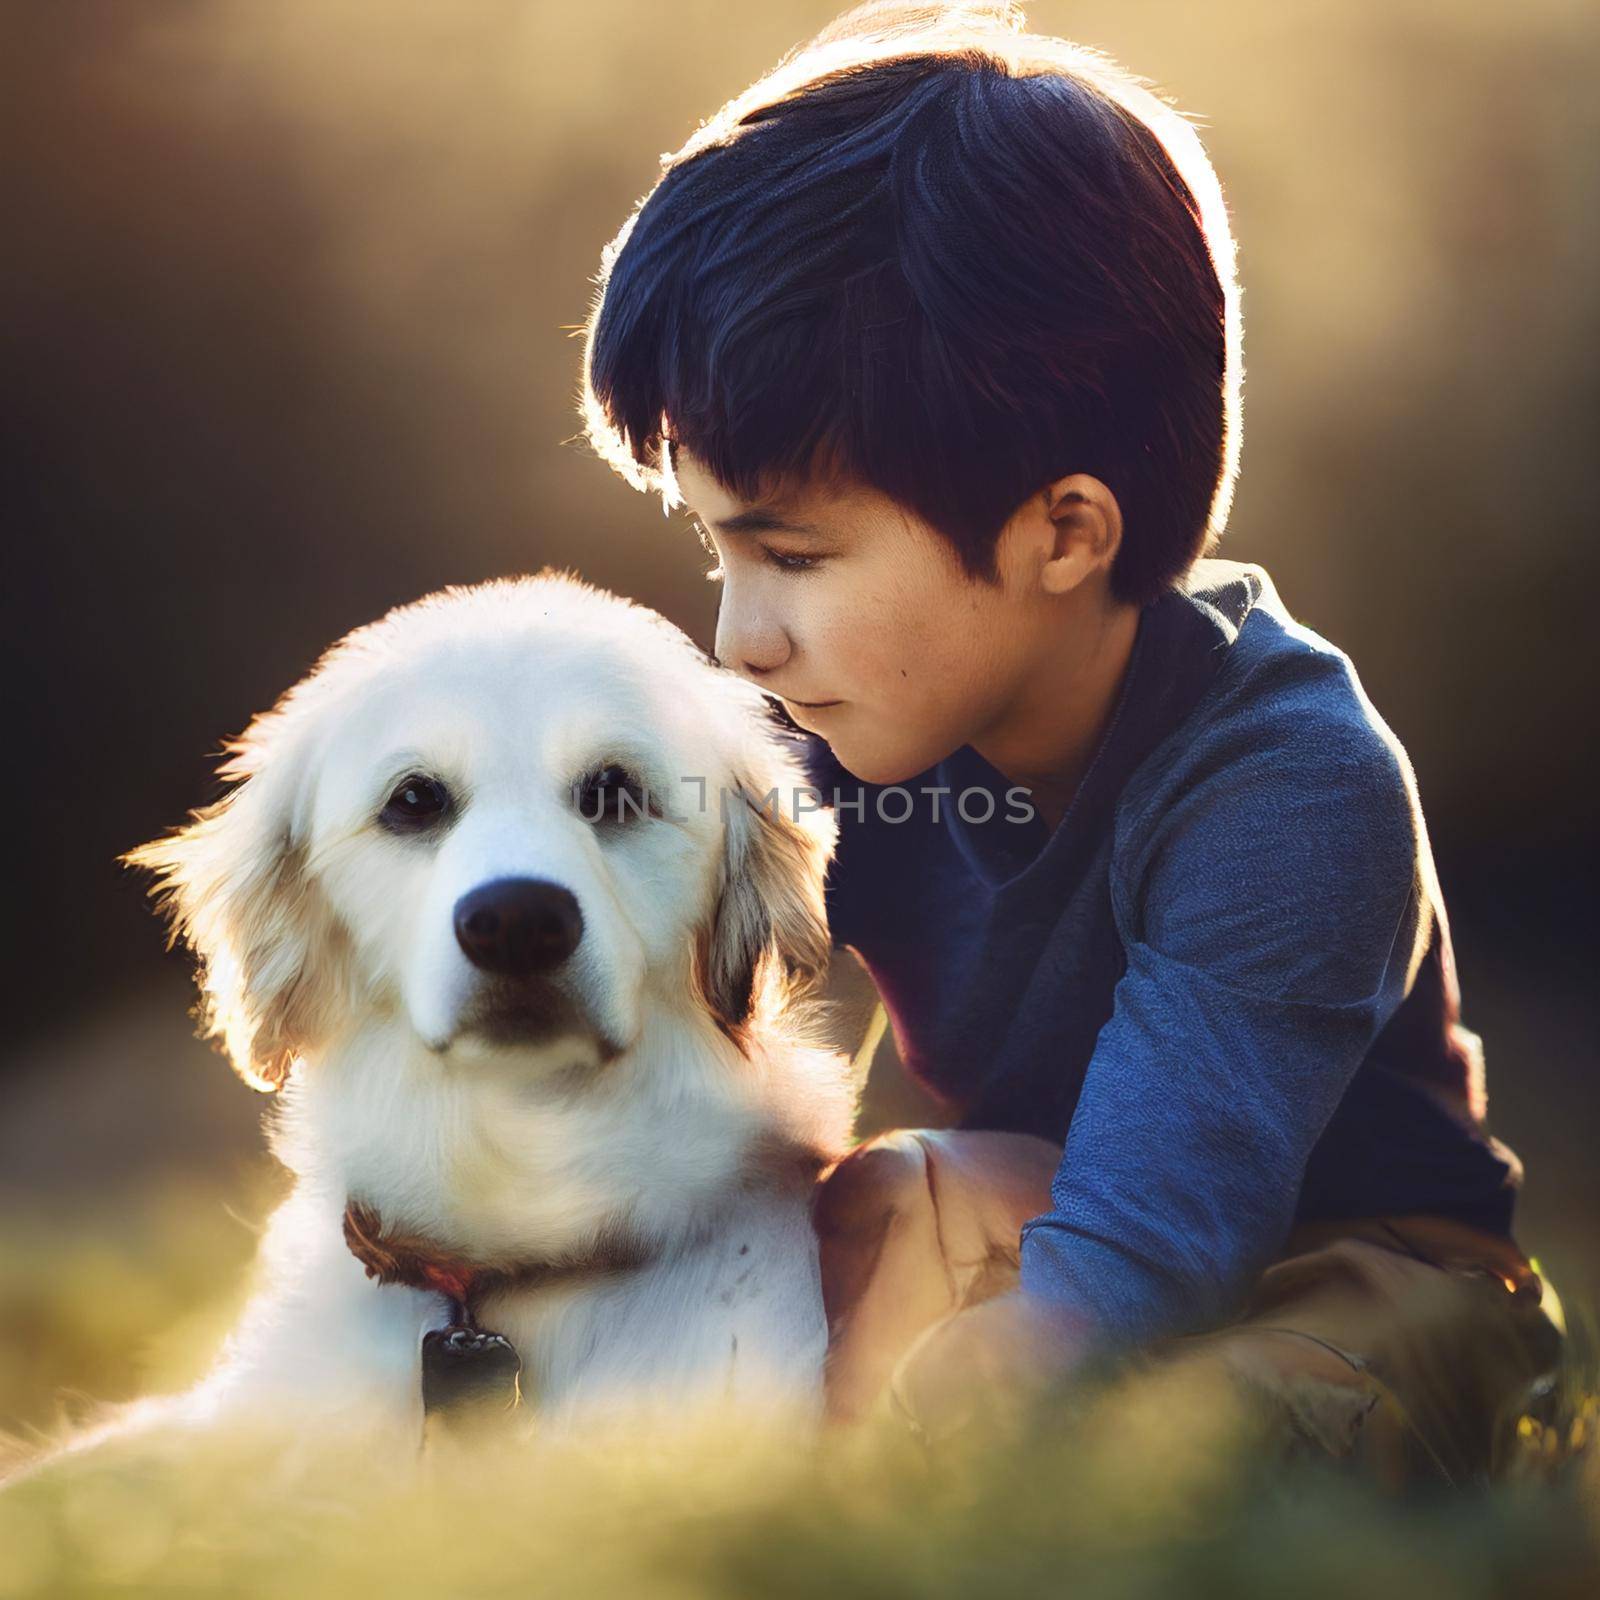 Illustration of a child and white puppy